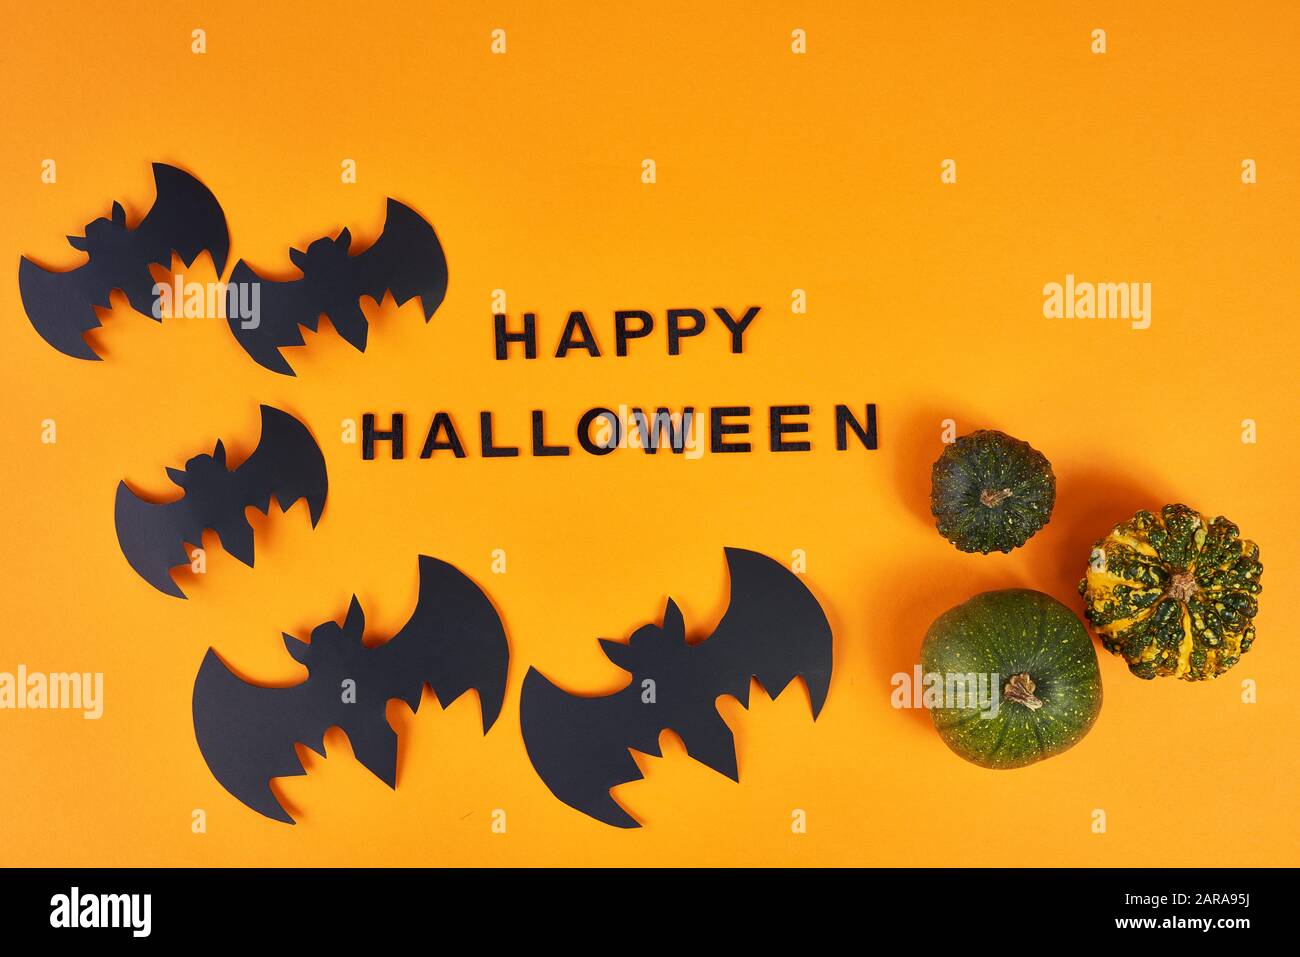 Spooky halloween background with wishes Stock Photo